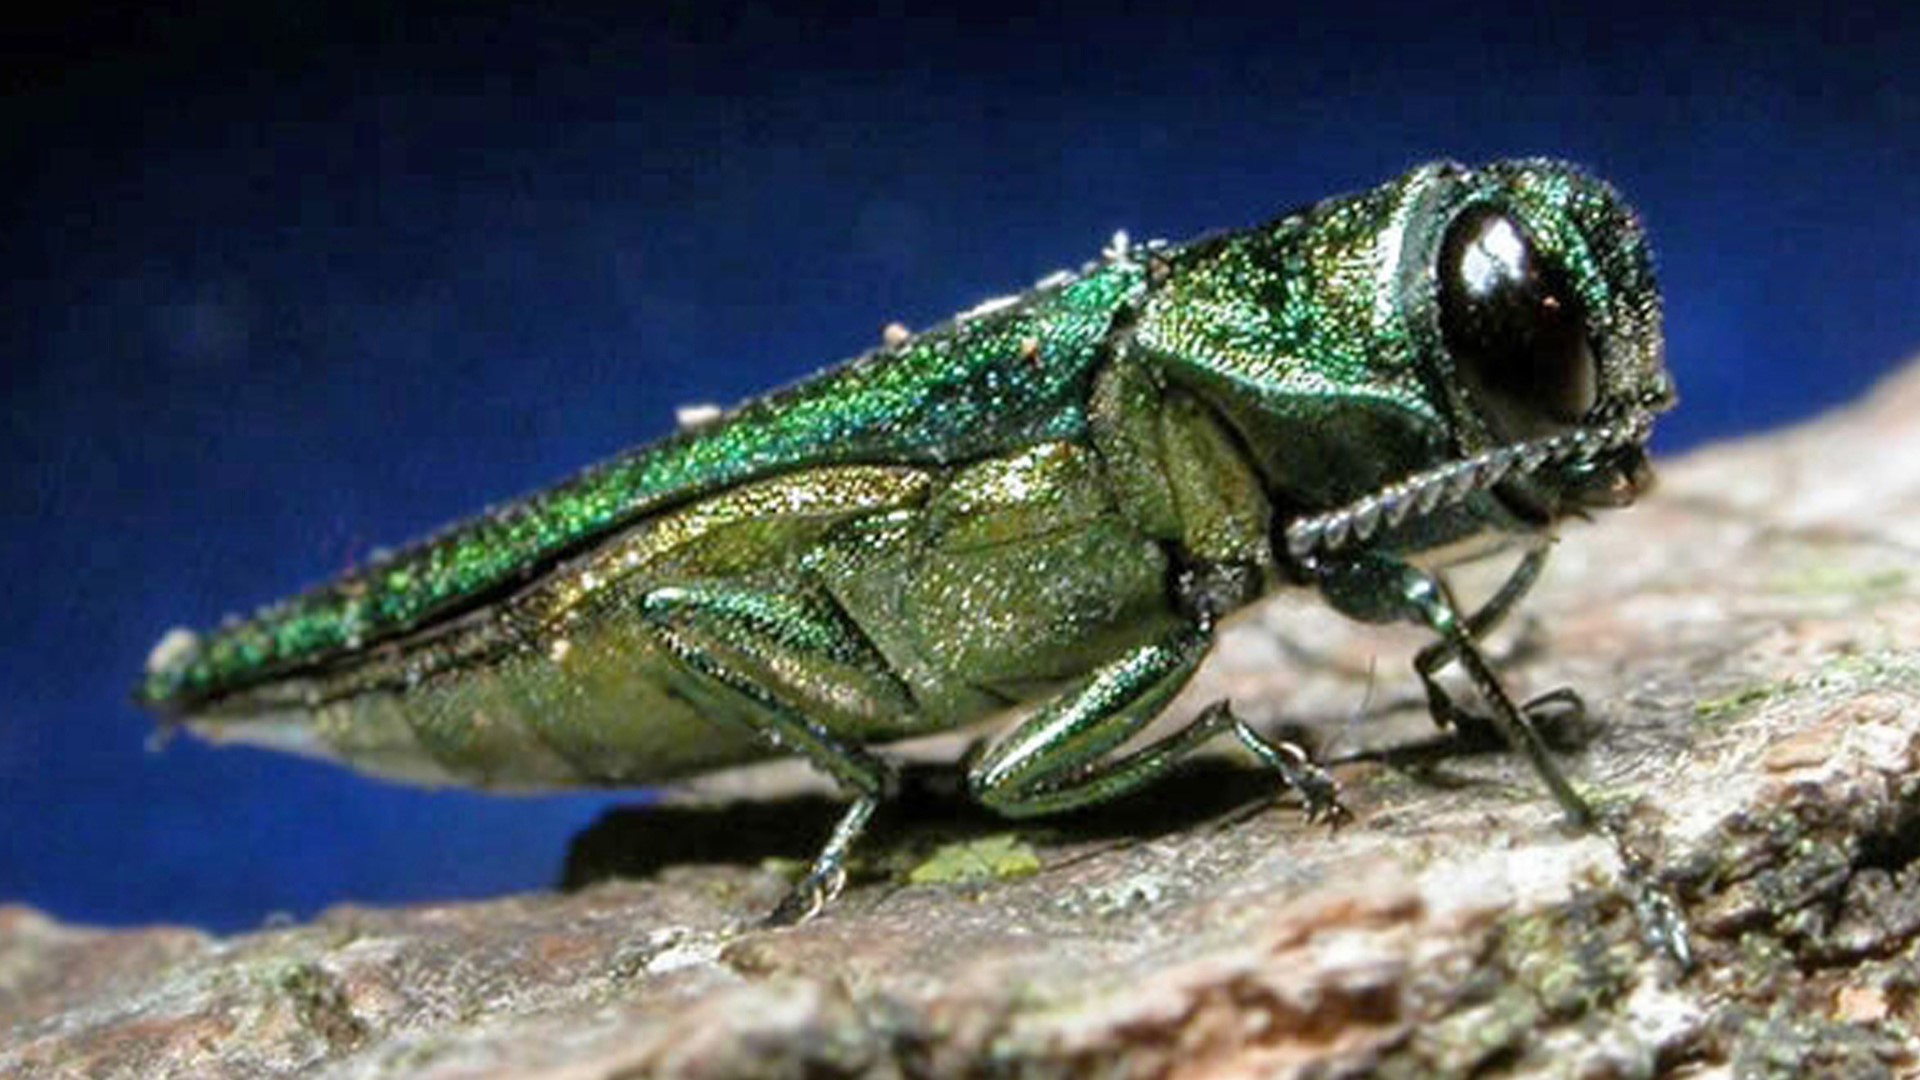 The Oregon Department of Forestry says the invasive Emerald Ash Borer could wipe out 95% of Oregon's ash trees within 10 years.